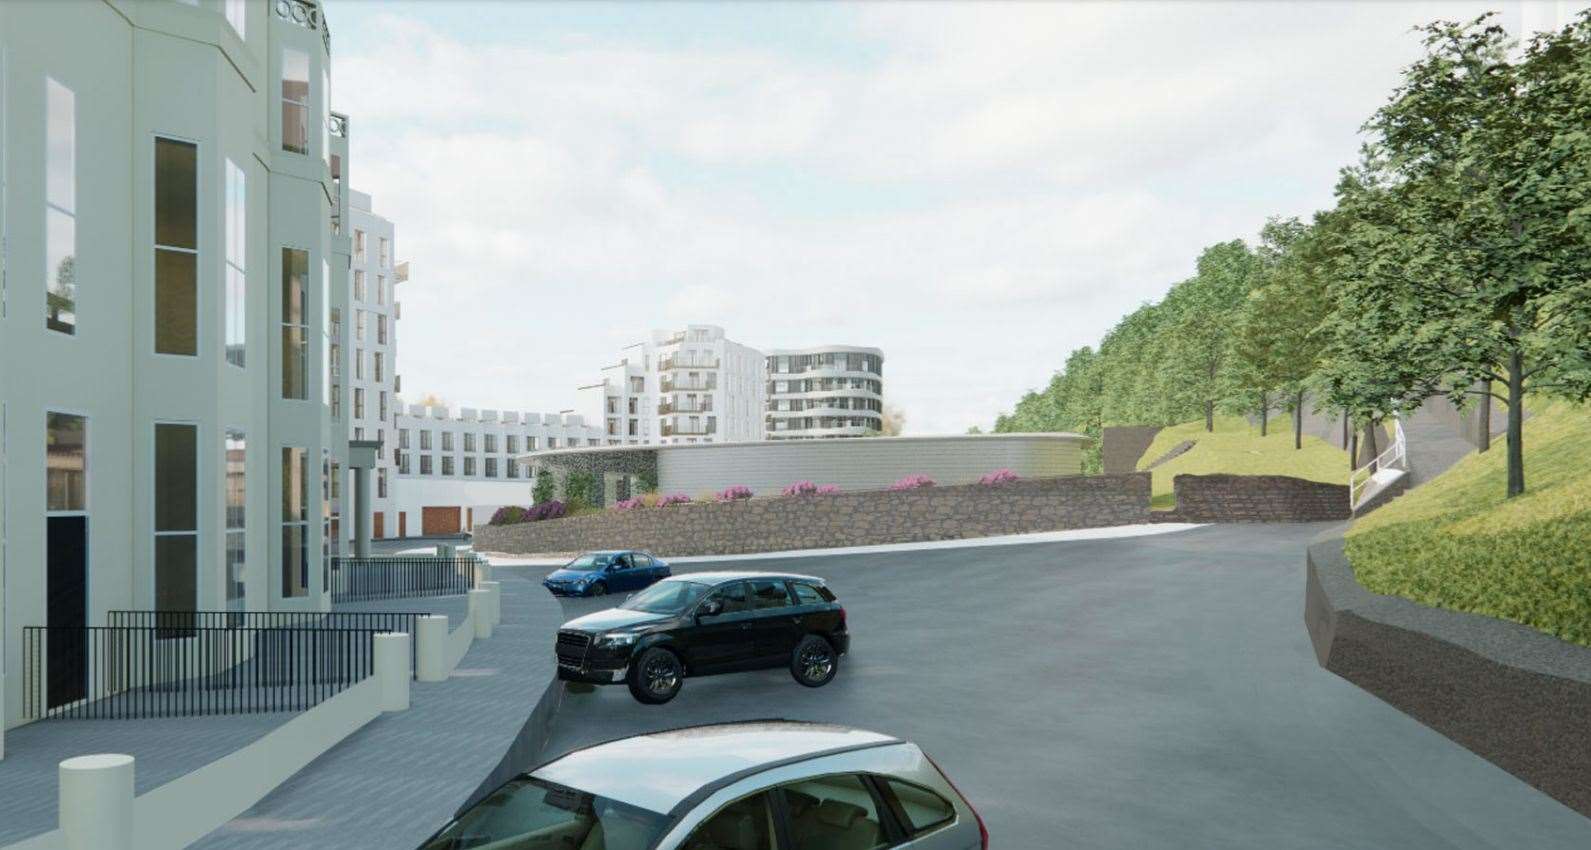 The new car park will include a roof, security fencing, a gate and 11 storage units. Picture: FHSDC